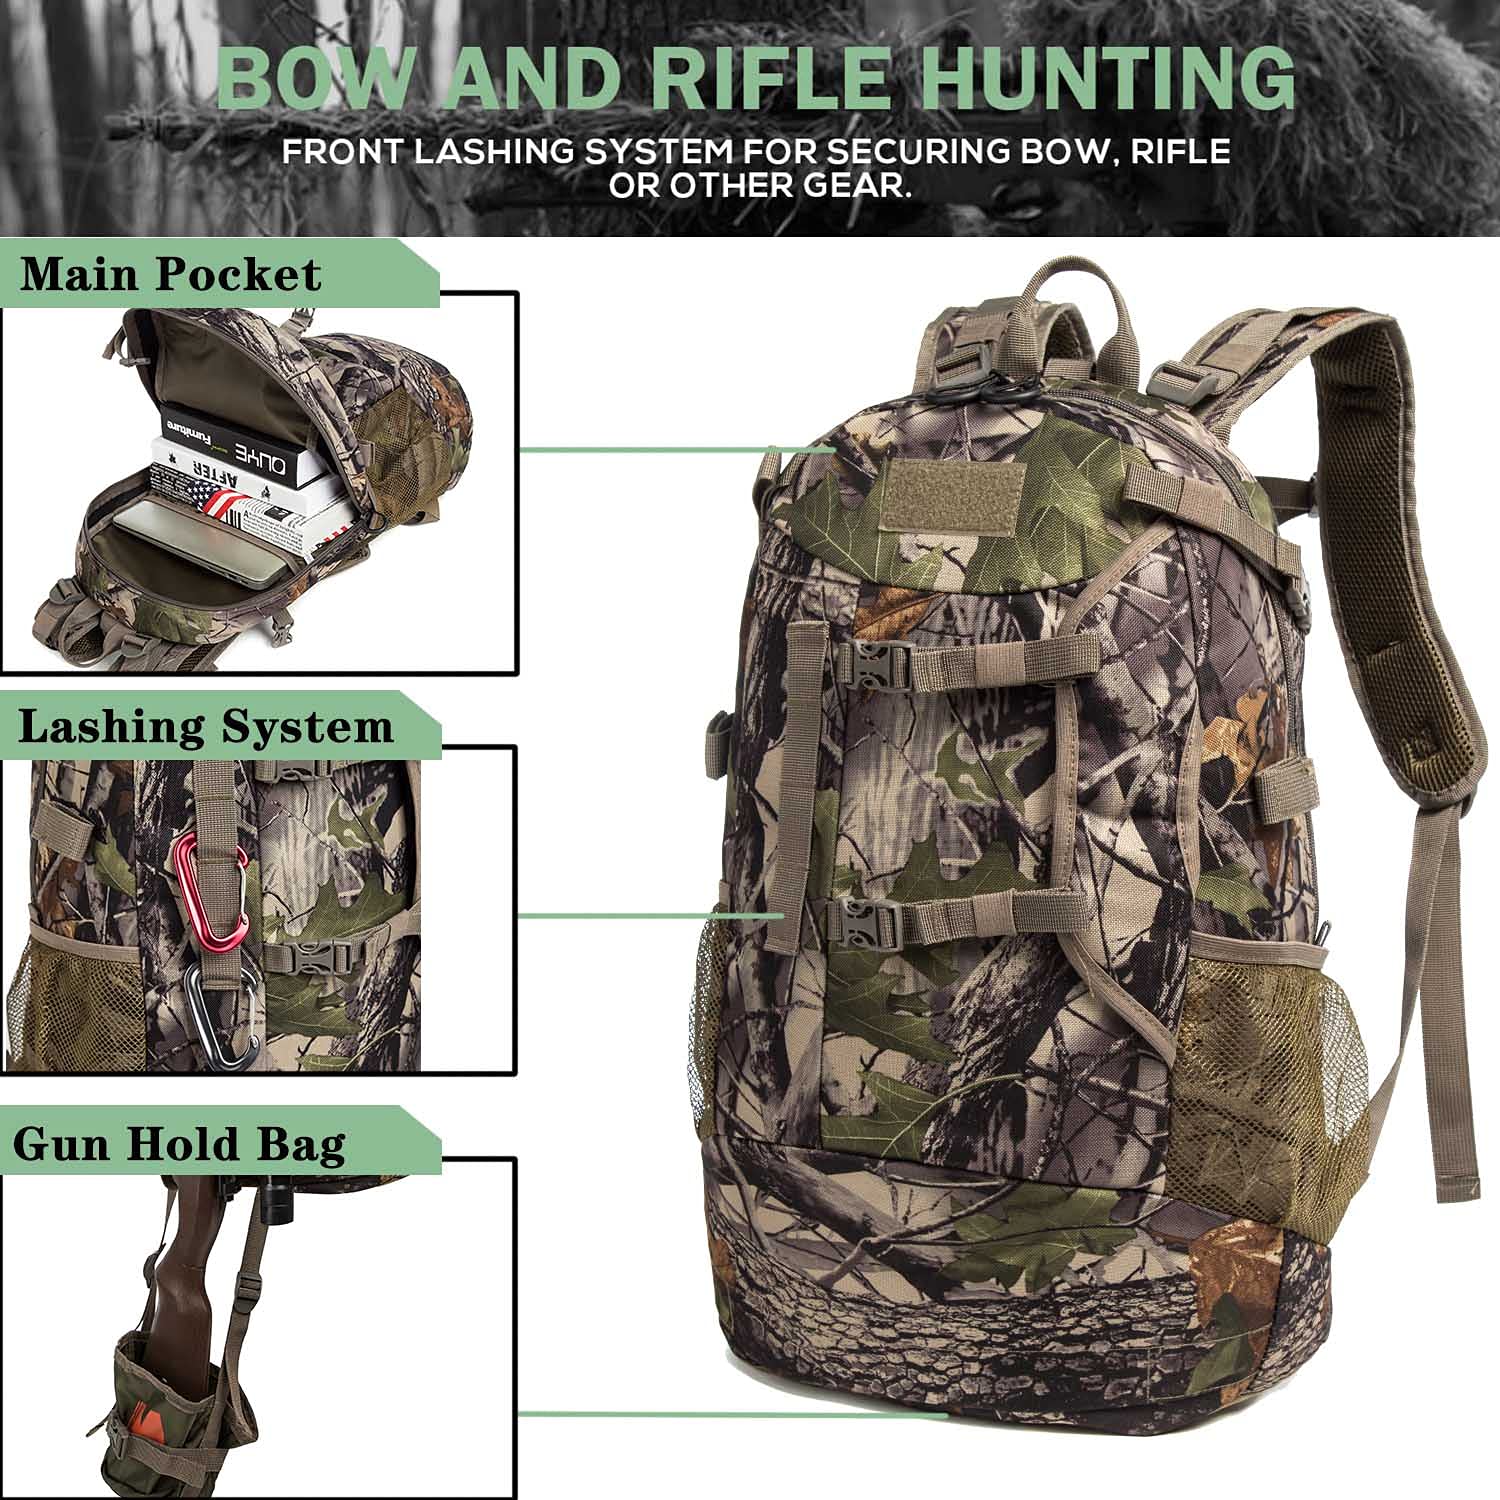 MARITTON Hunting Backpack,Durable Hunting Pack with Bow and Rifle Carry System for Camping,Hunting,Hiking. (Camo-Green)